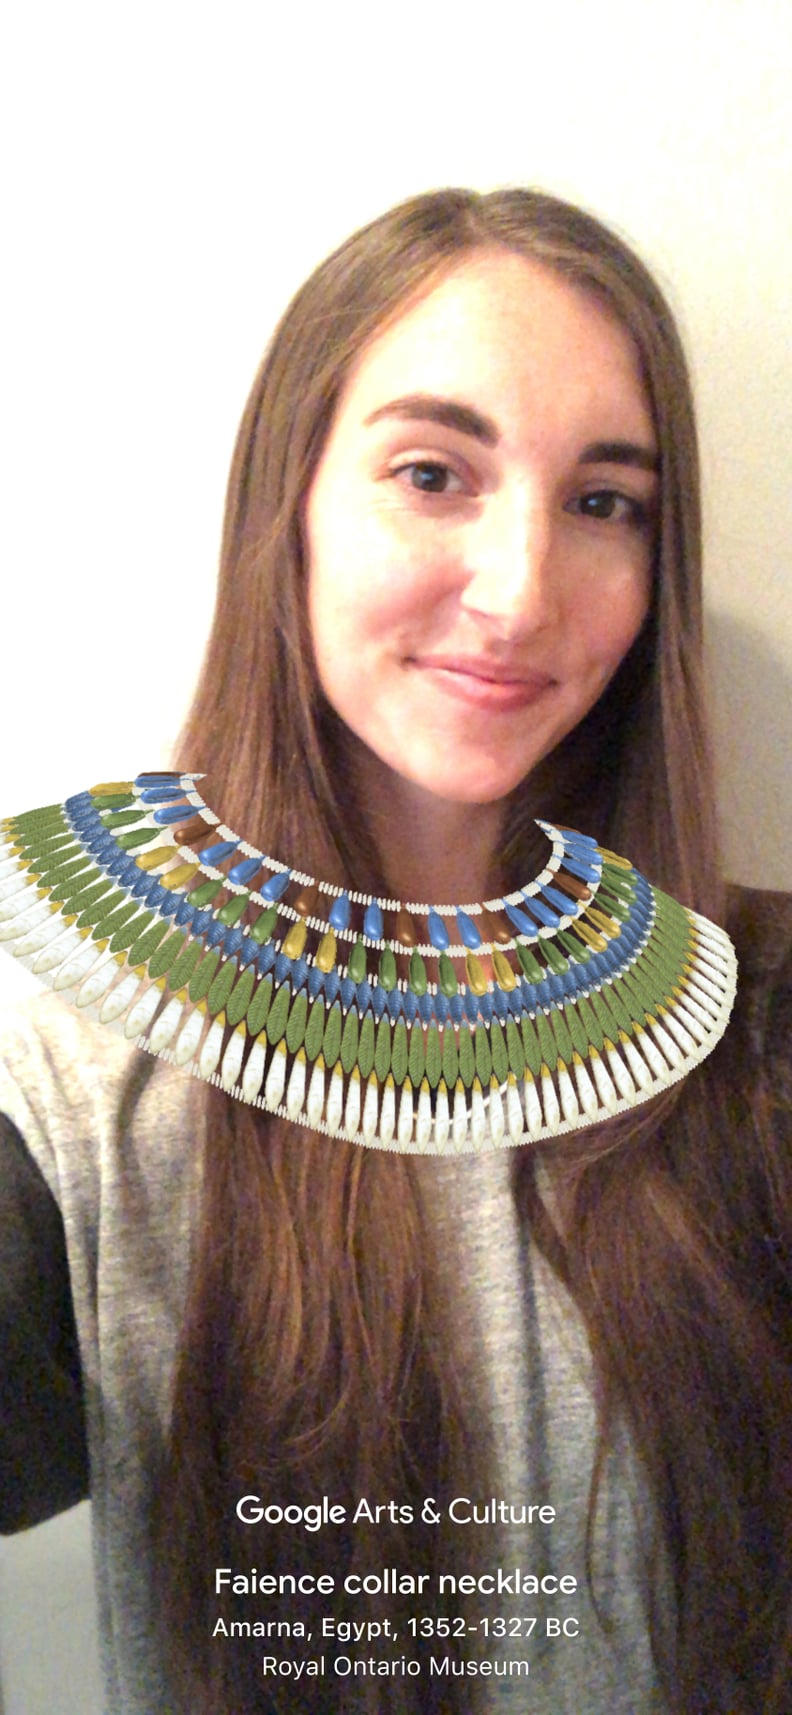 What the Amarna, Egypt "Faience Collar Necklace" Filter Looks Like